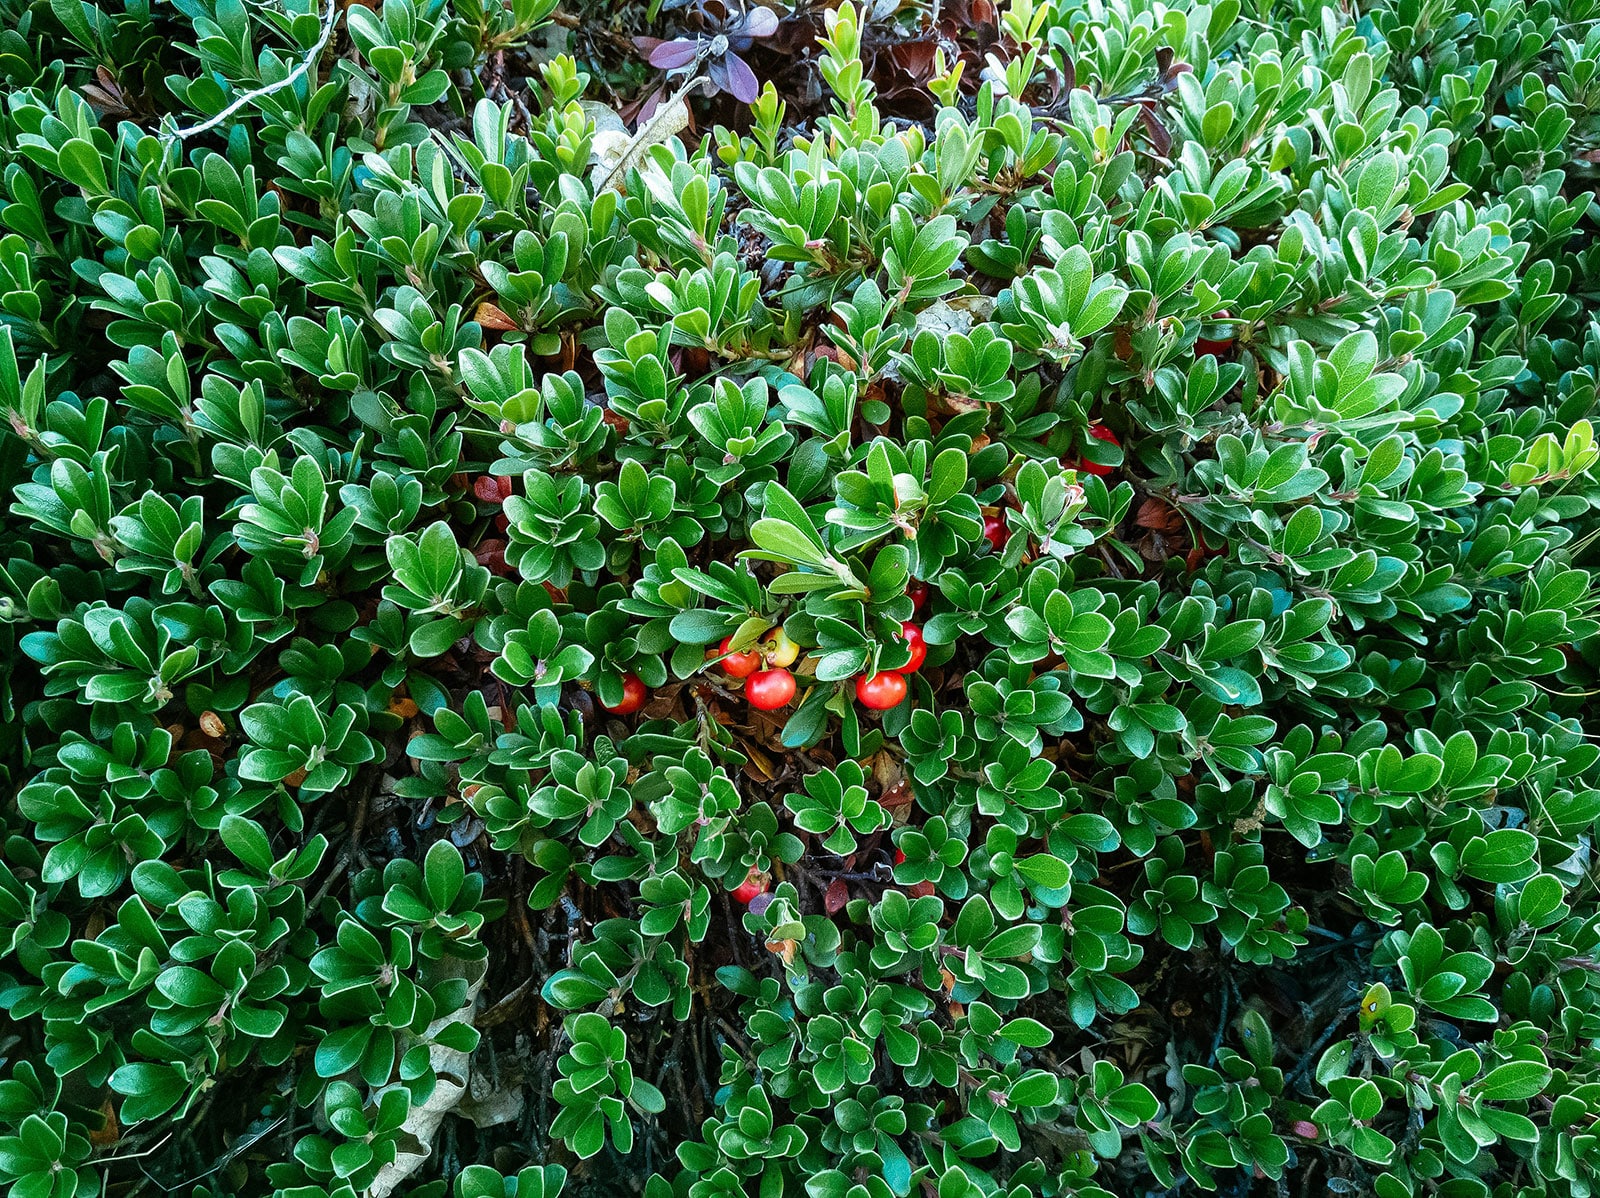 Bearberry ground cover with a few red berries peeking out